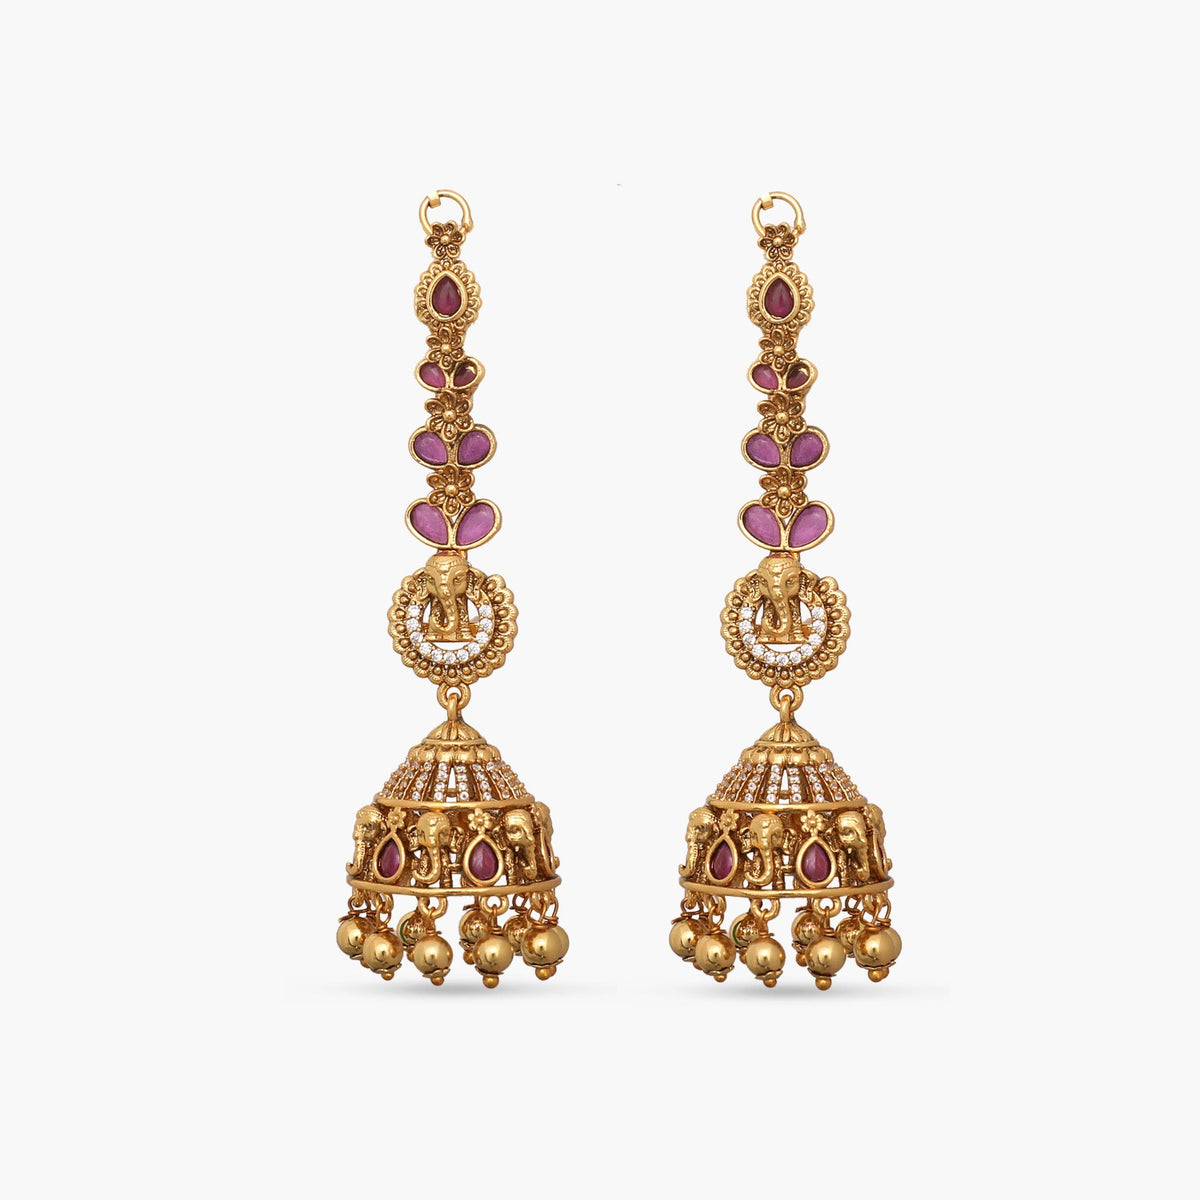 Ramisa Antique Earrings with Chain